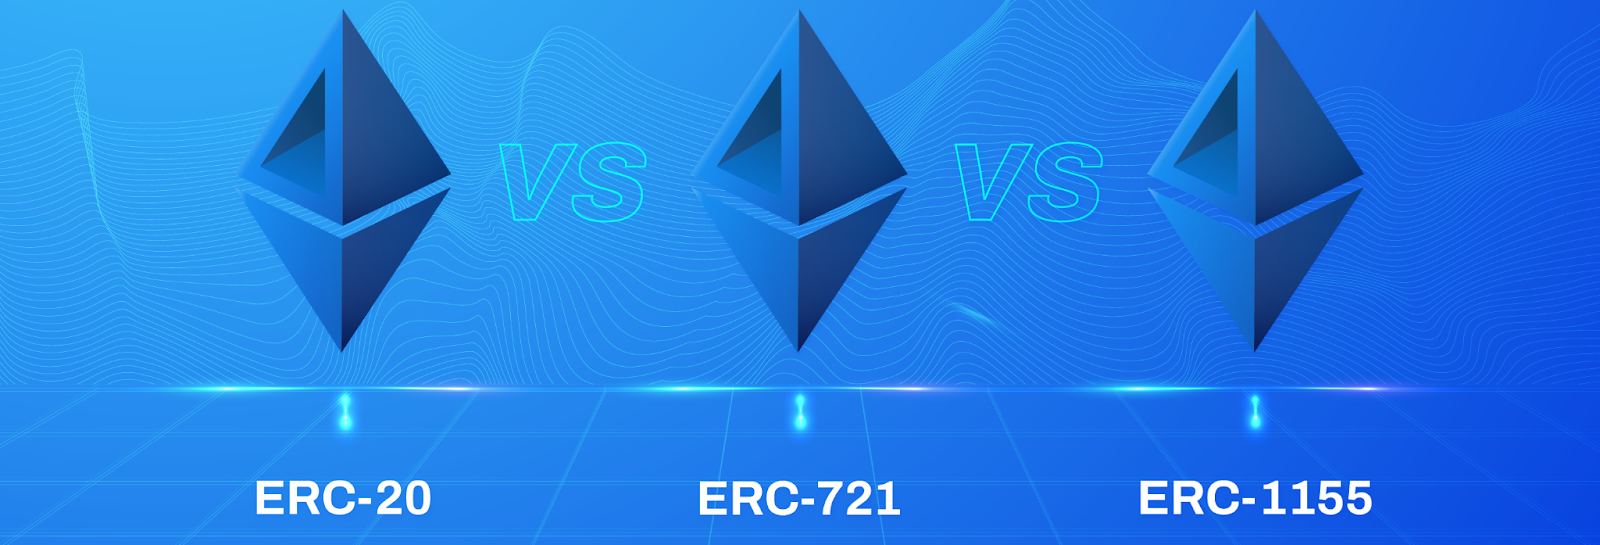 erc20, erc721, and erc1155 standards side by side